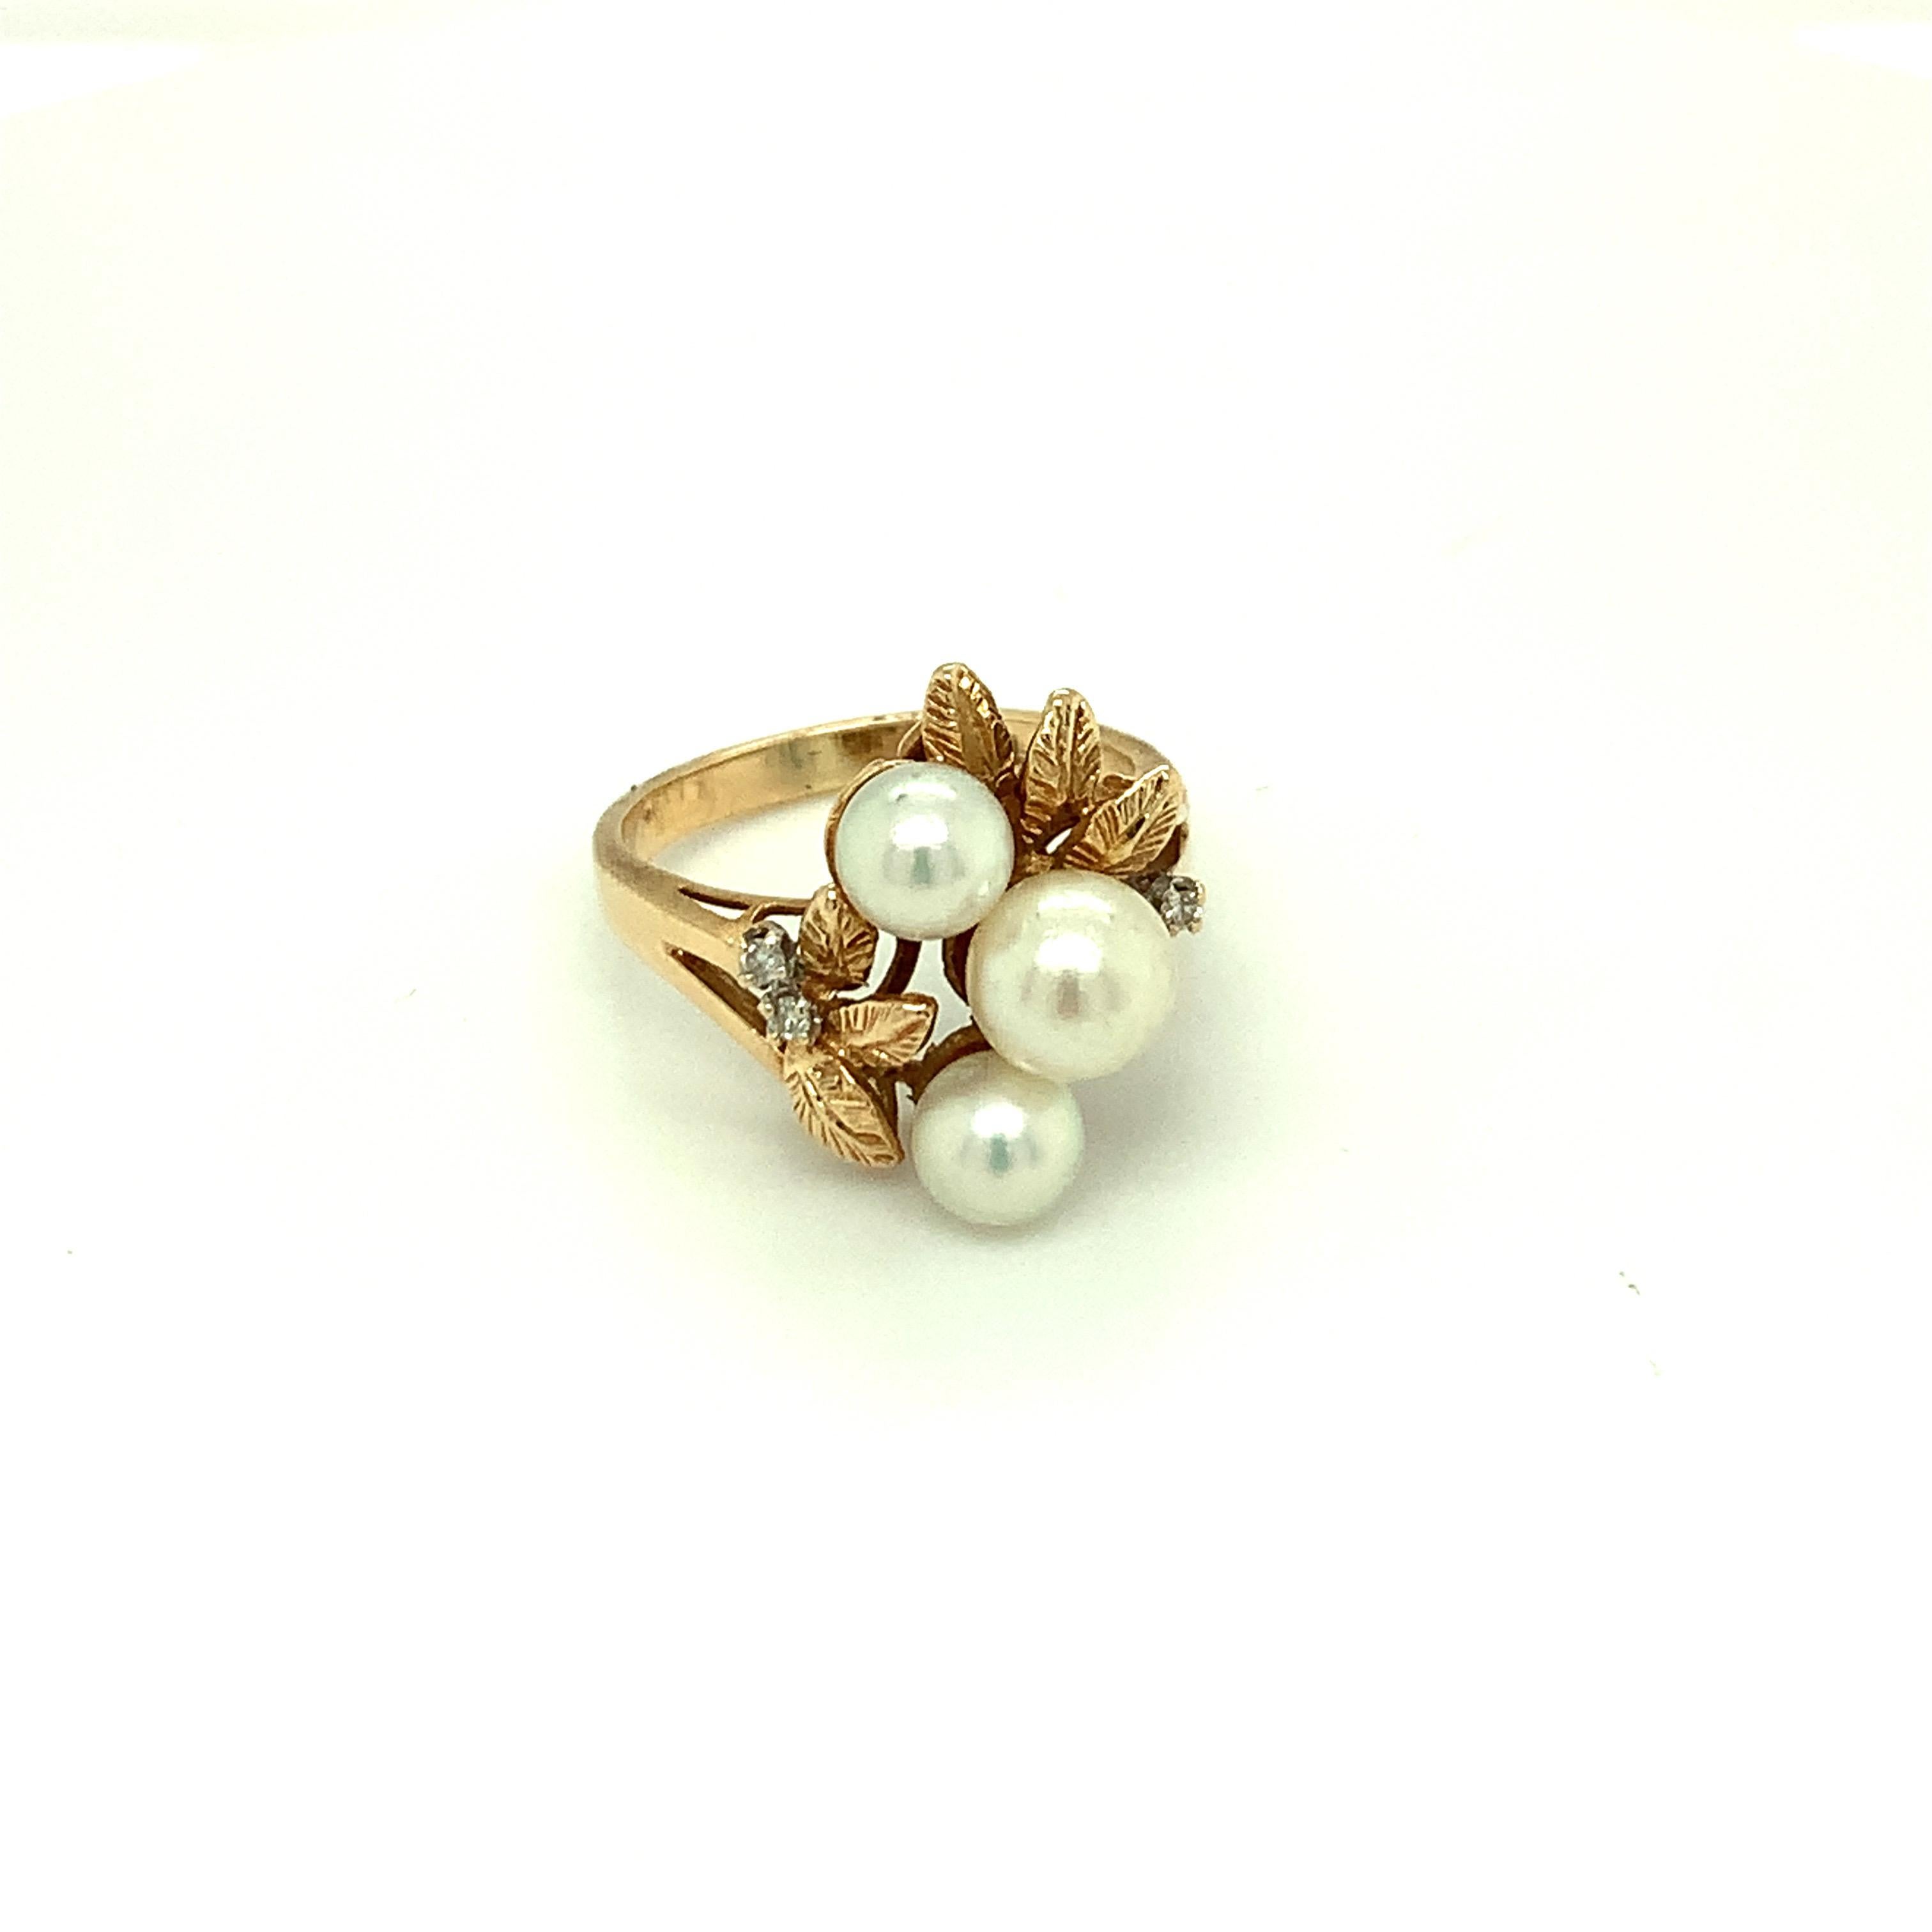 This graceful three stone style pearl ring displays a trio of luminous cultured pearls with accents of diamonds and leaf motifs. Set in 14K yellow gold is a beautiful gift for a June born.